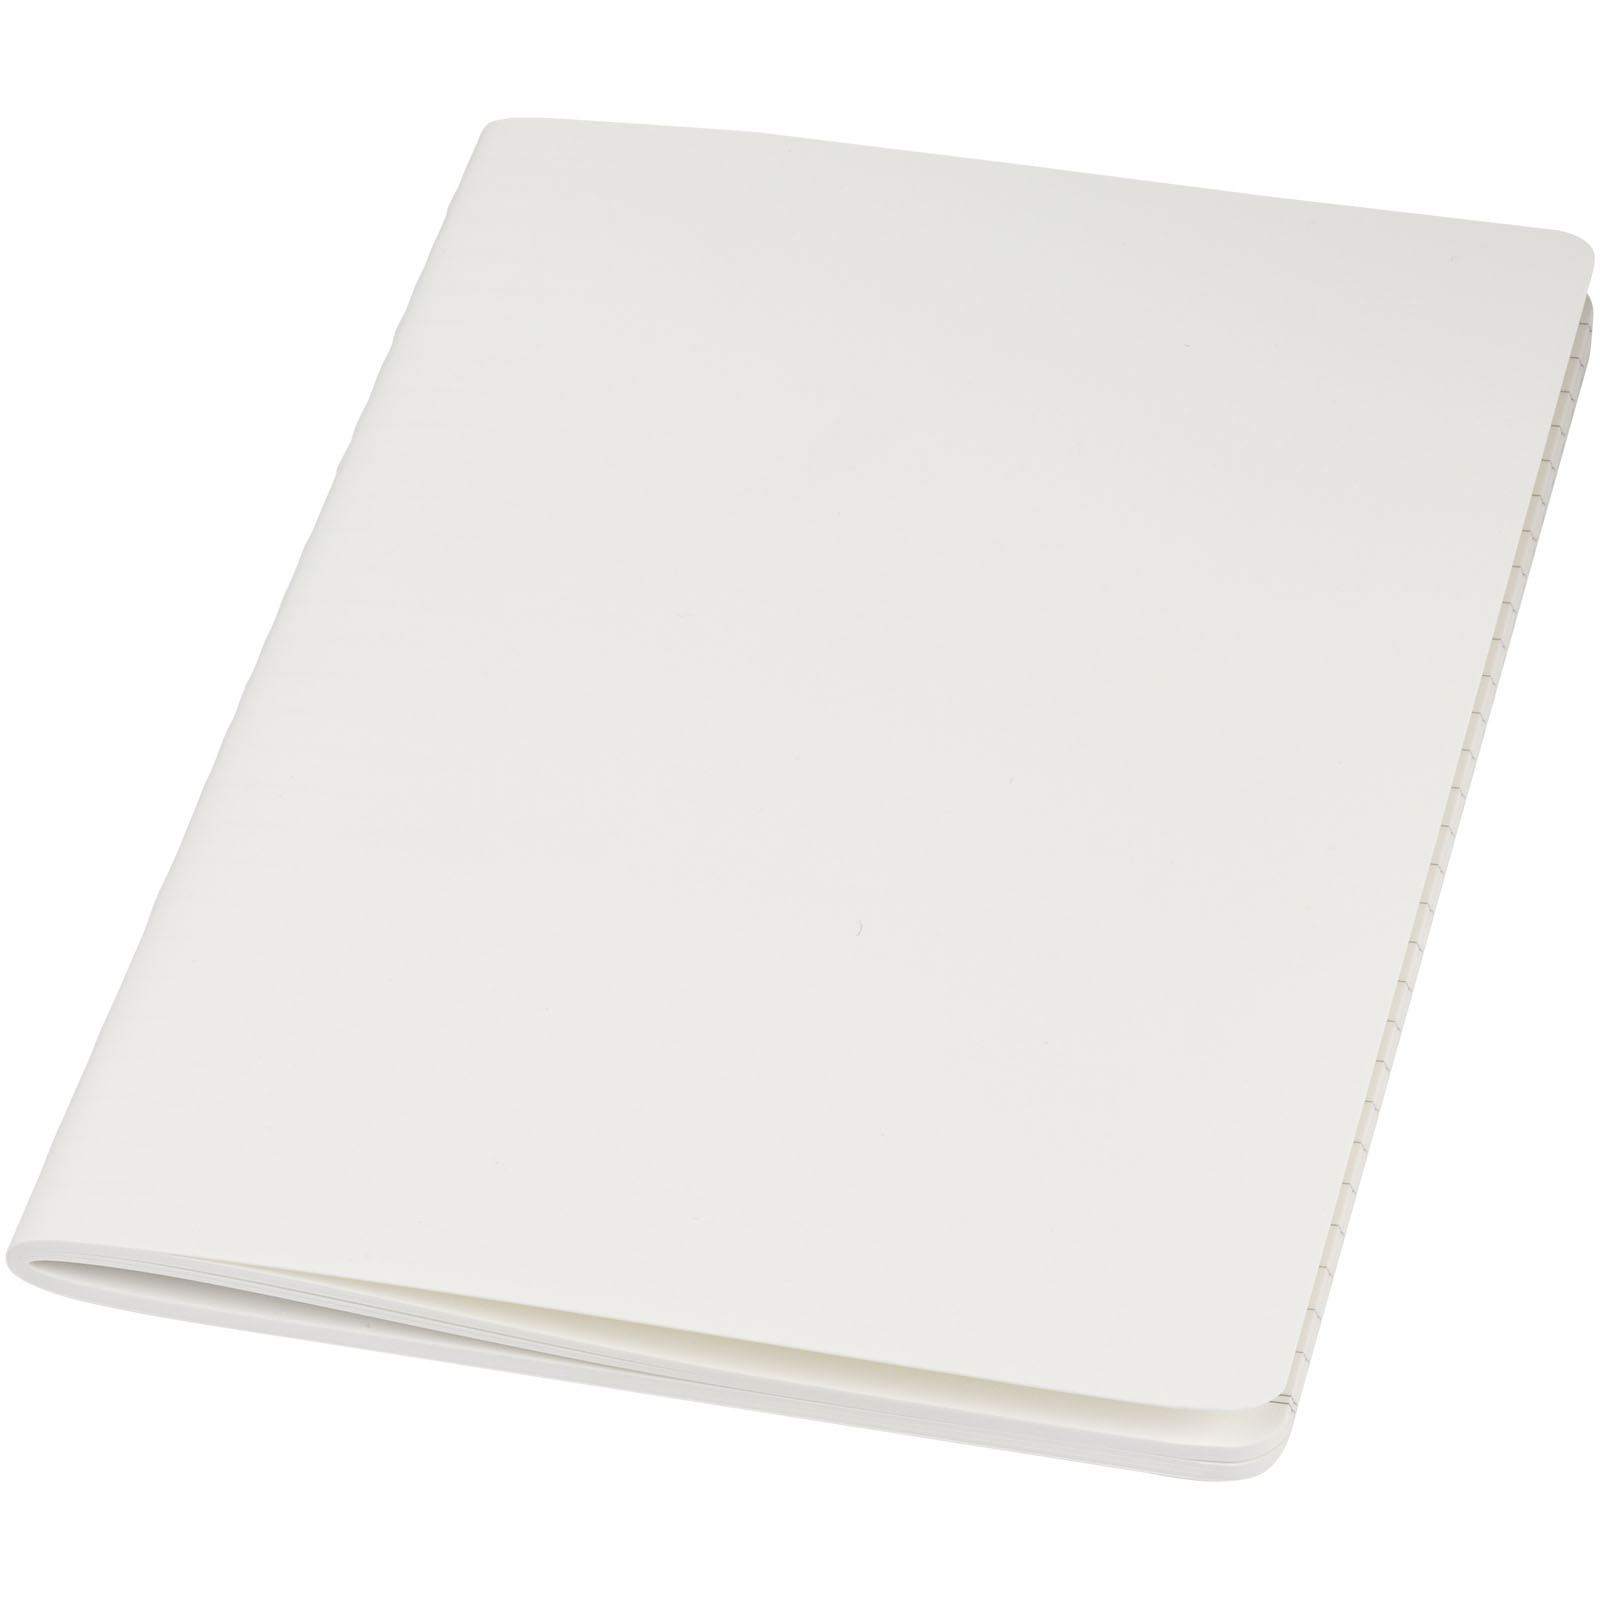 Soft cover notebooks - Shale stone paper cahier journal